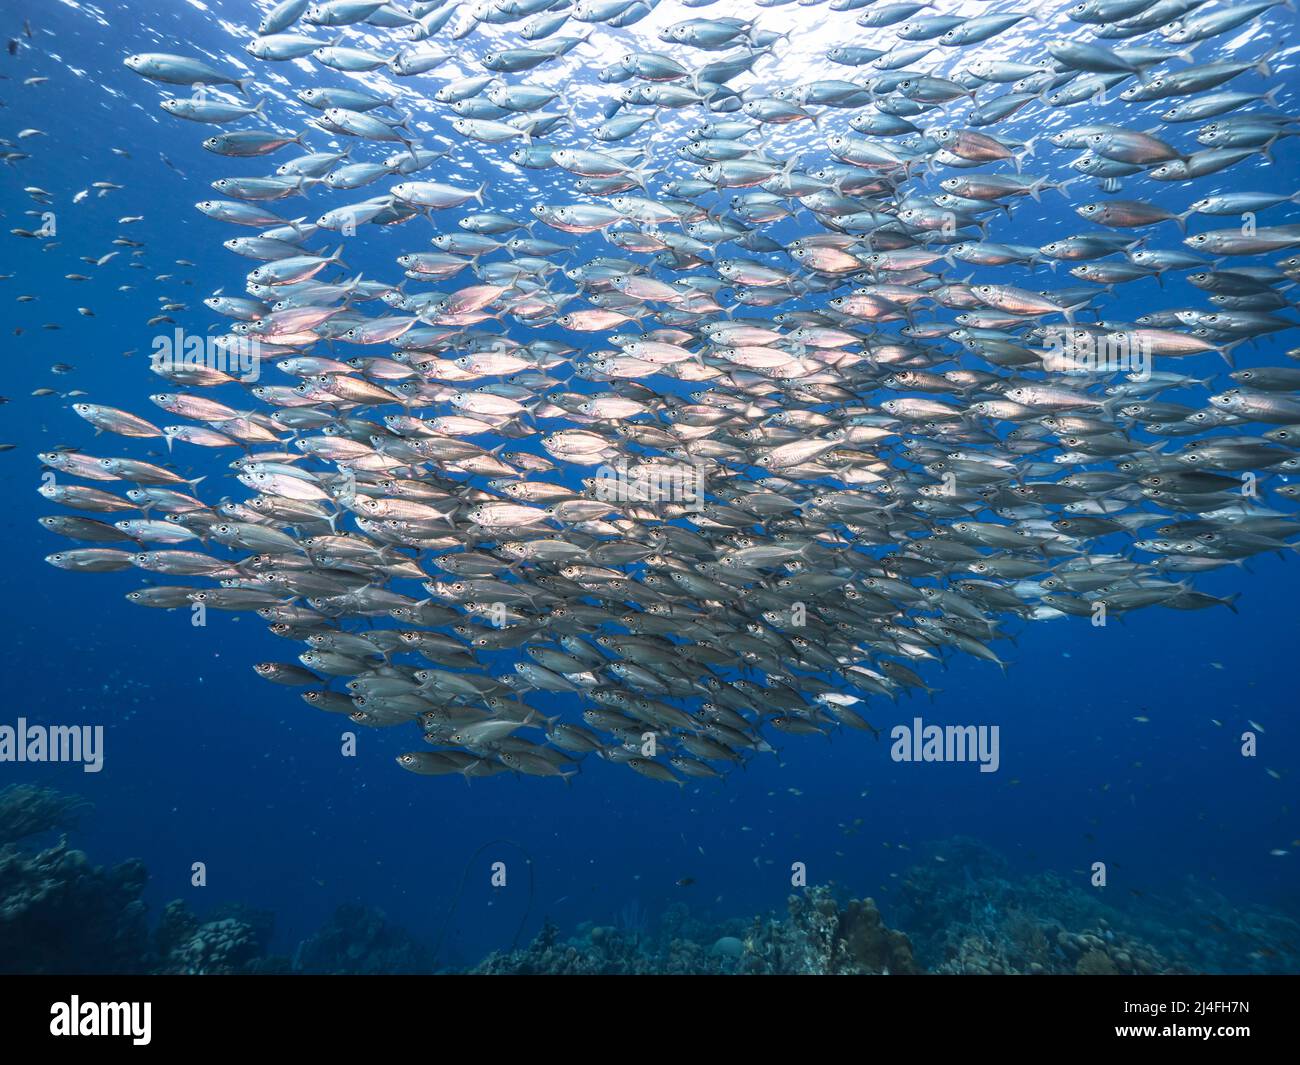 Seascape with Bait Ball, School of Fish, Mackerel fish in the coral reef of  the Caribbean Sea, Curacao Stock Photo - Alamy